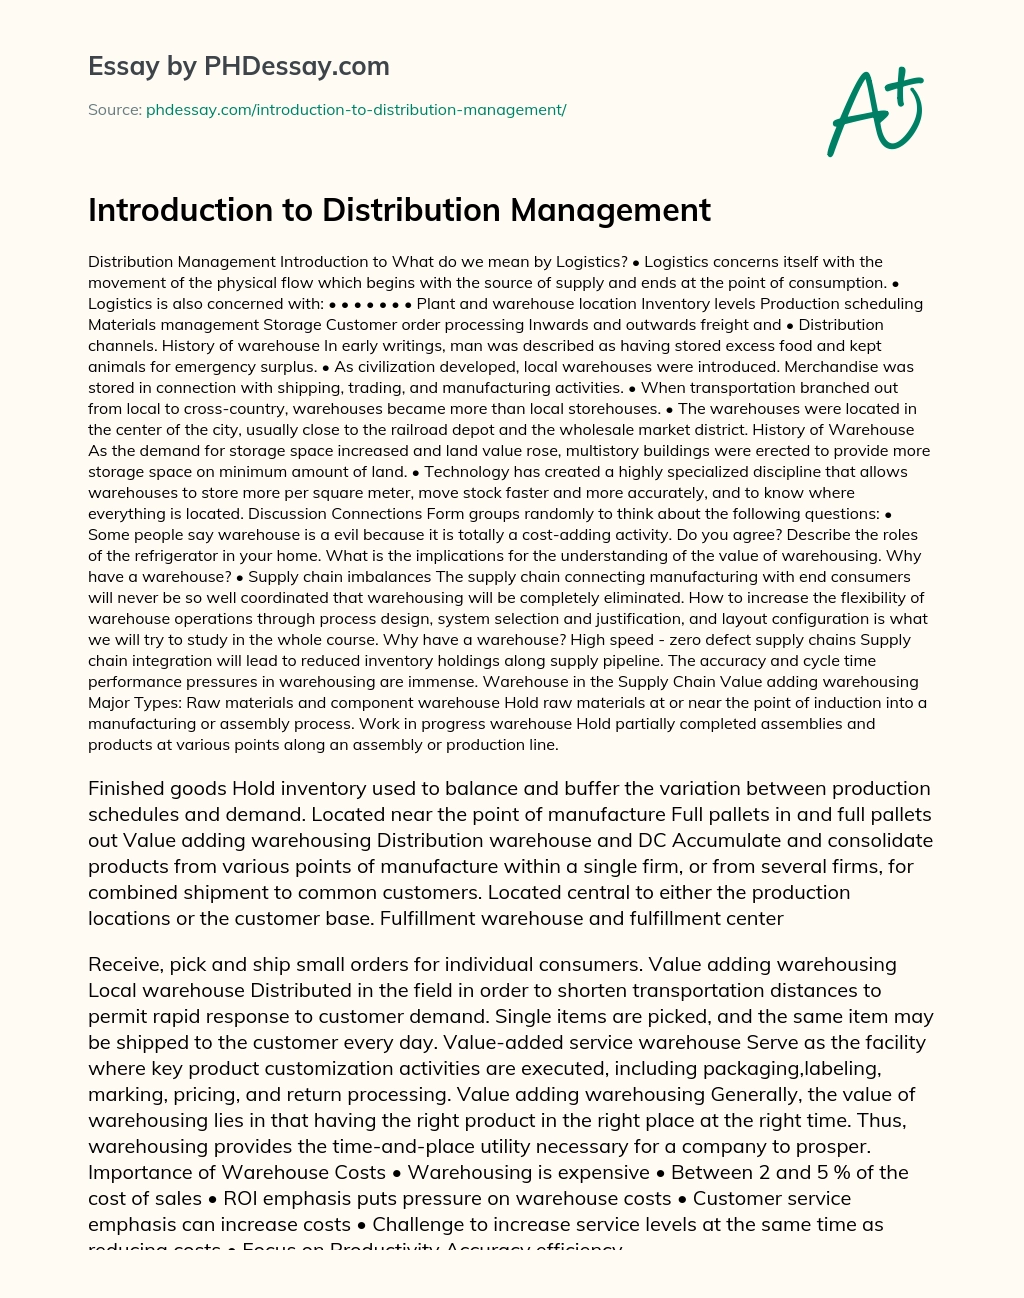 Introduction to Distribution Management essay